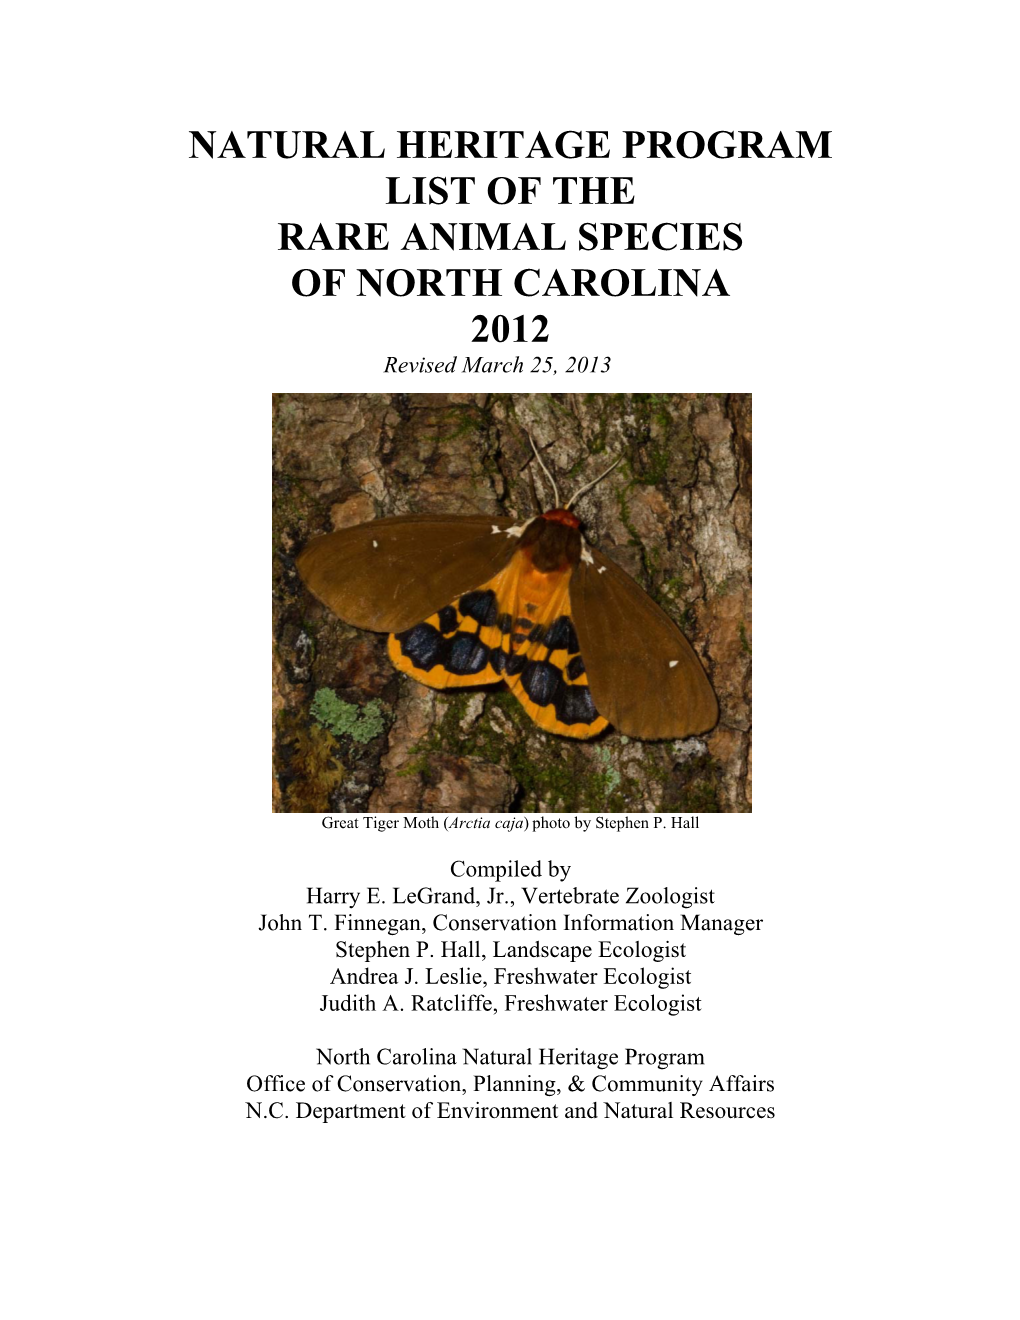 NATURAL HERITAGE PROGRAM LIST of the RARE ANIMAL SPECIES of NORTH CAROLINA 2012 Revised March 25, 2013